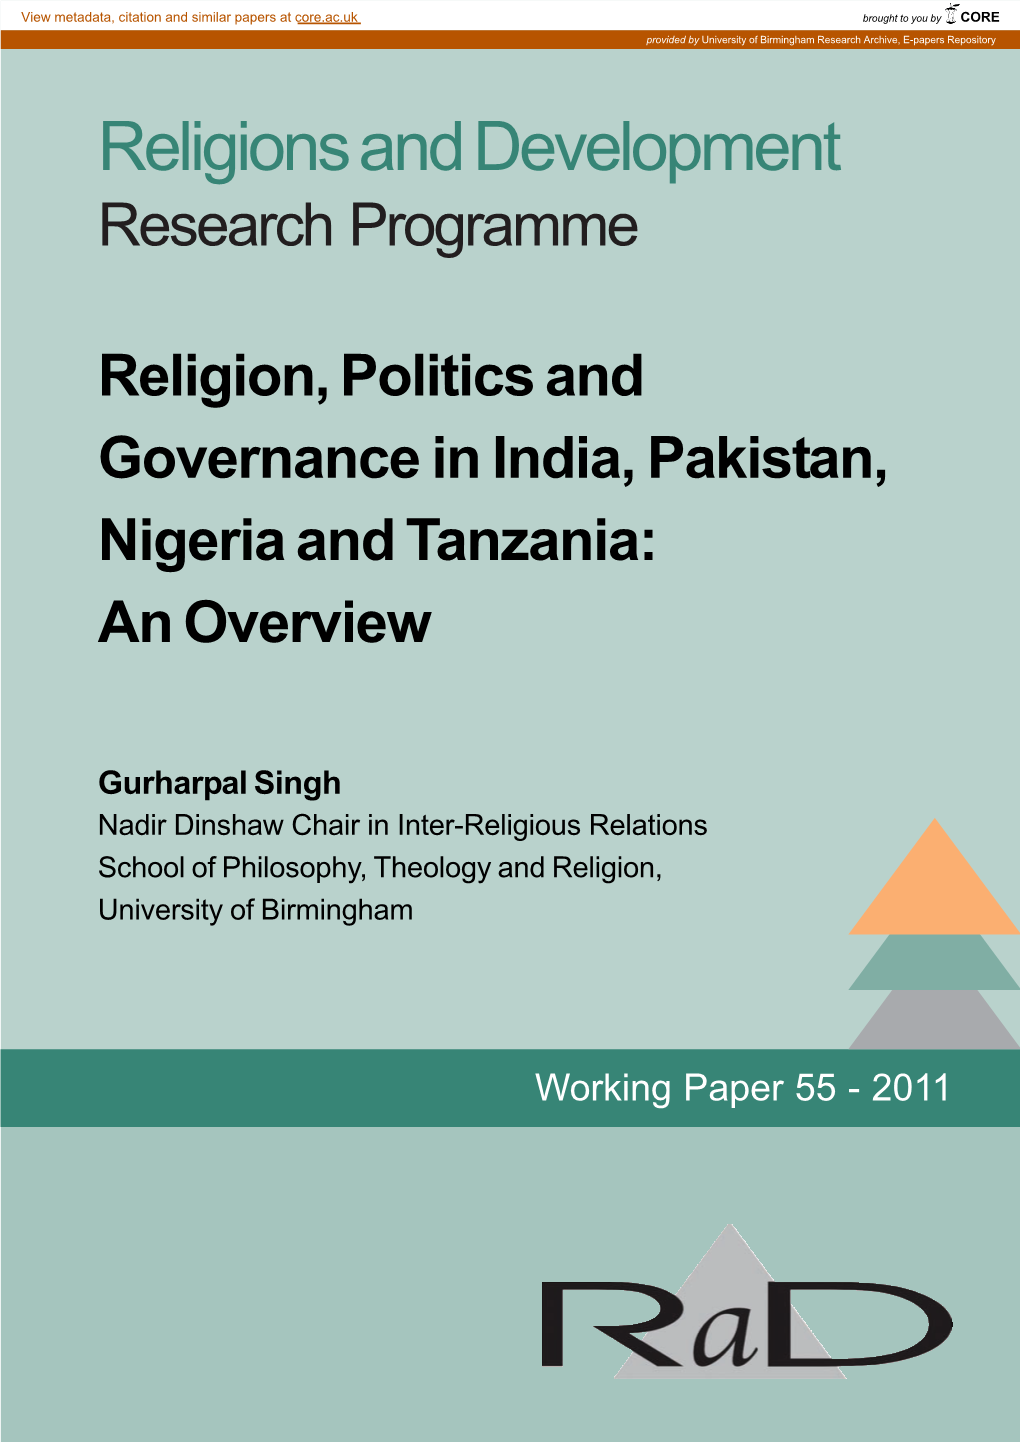 Religion, Politics and Governance in India, Pakistan, Nigeria and Tanzania: an Overview